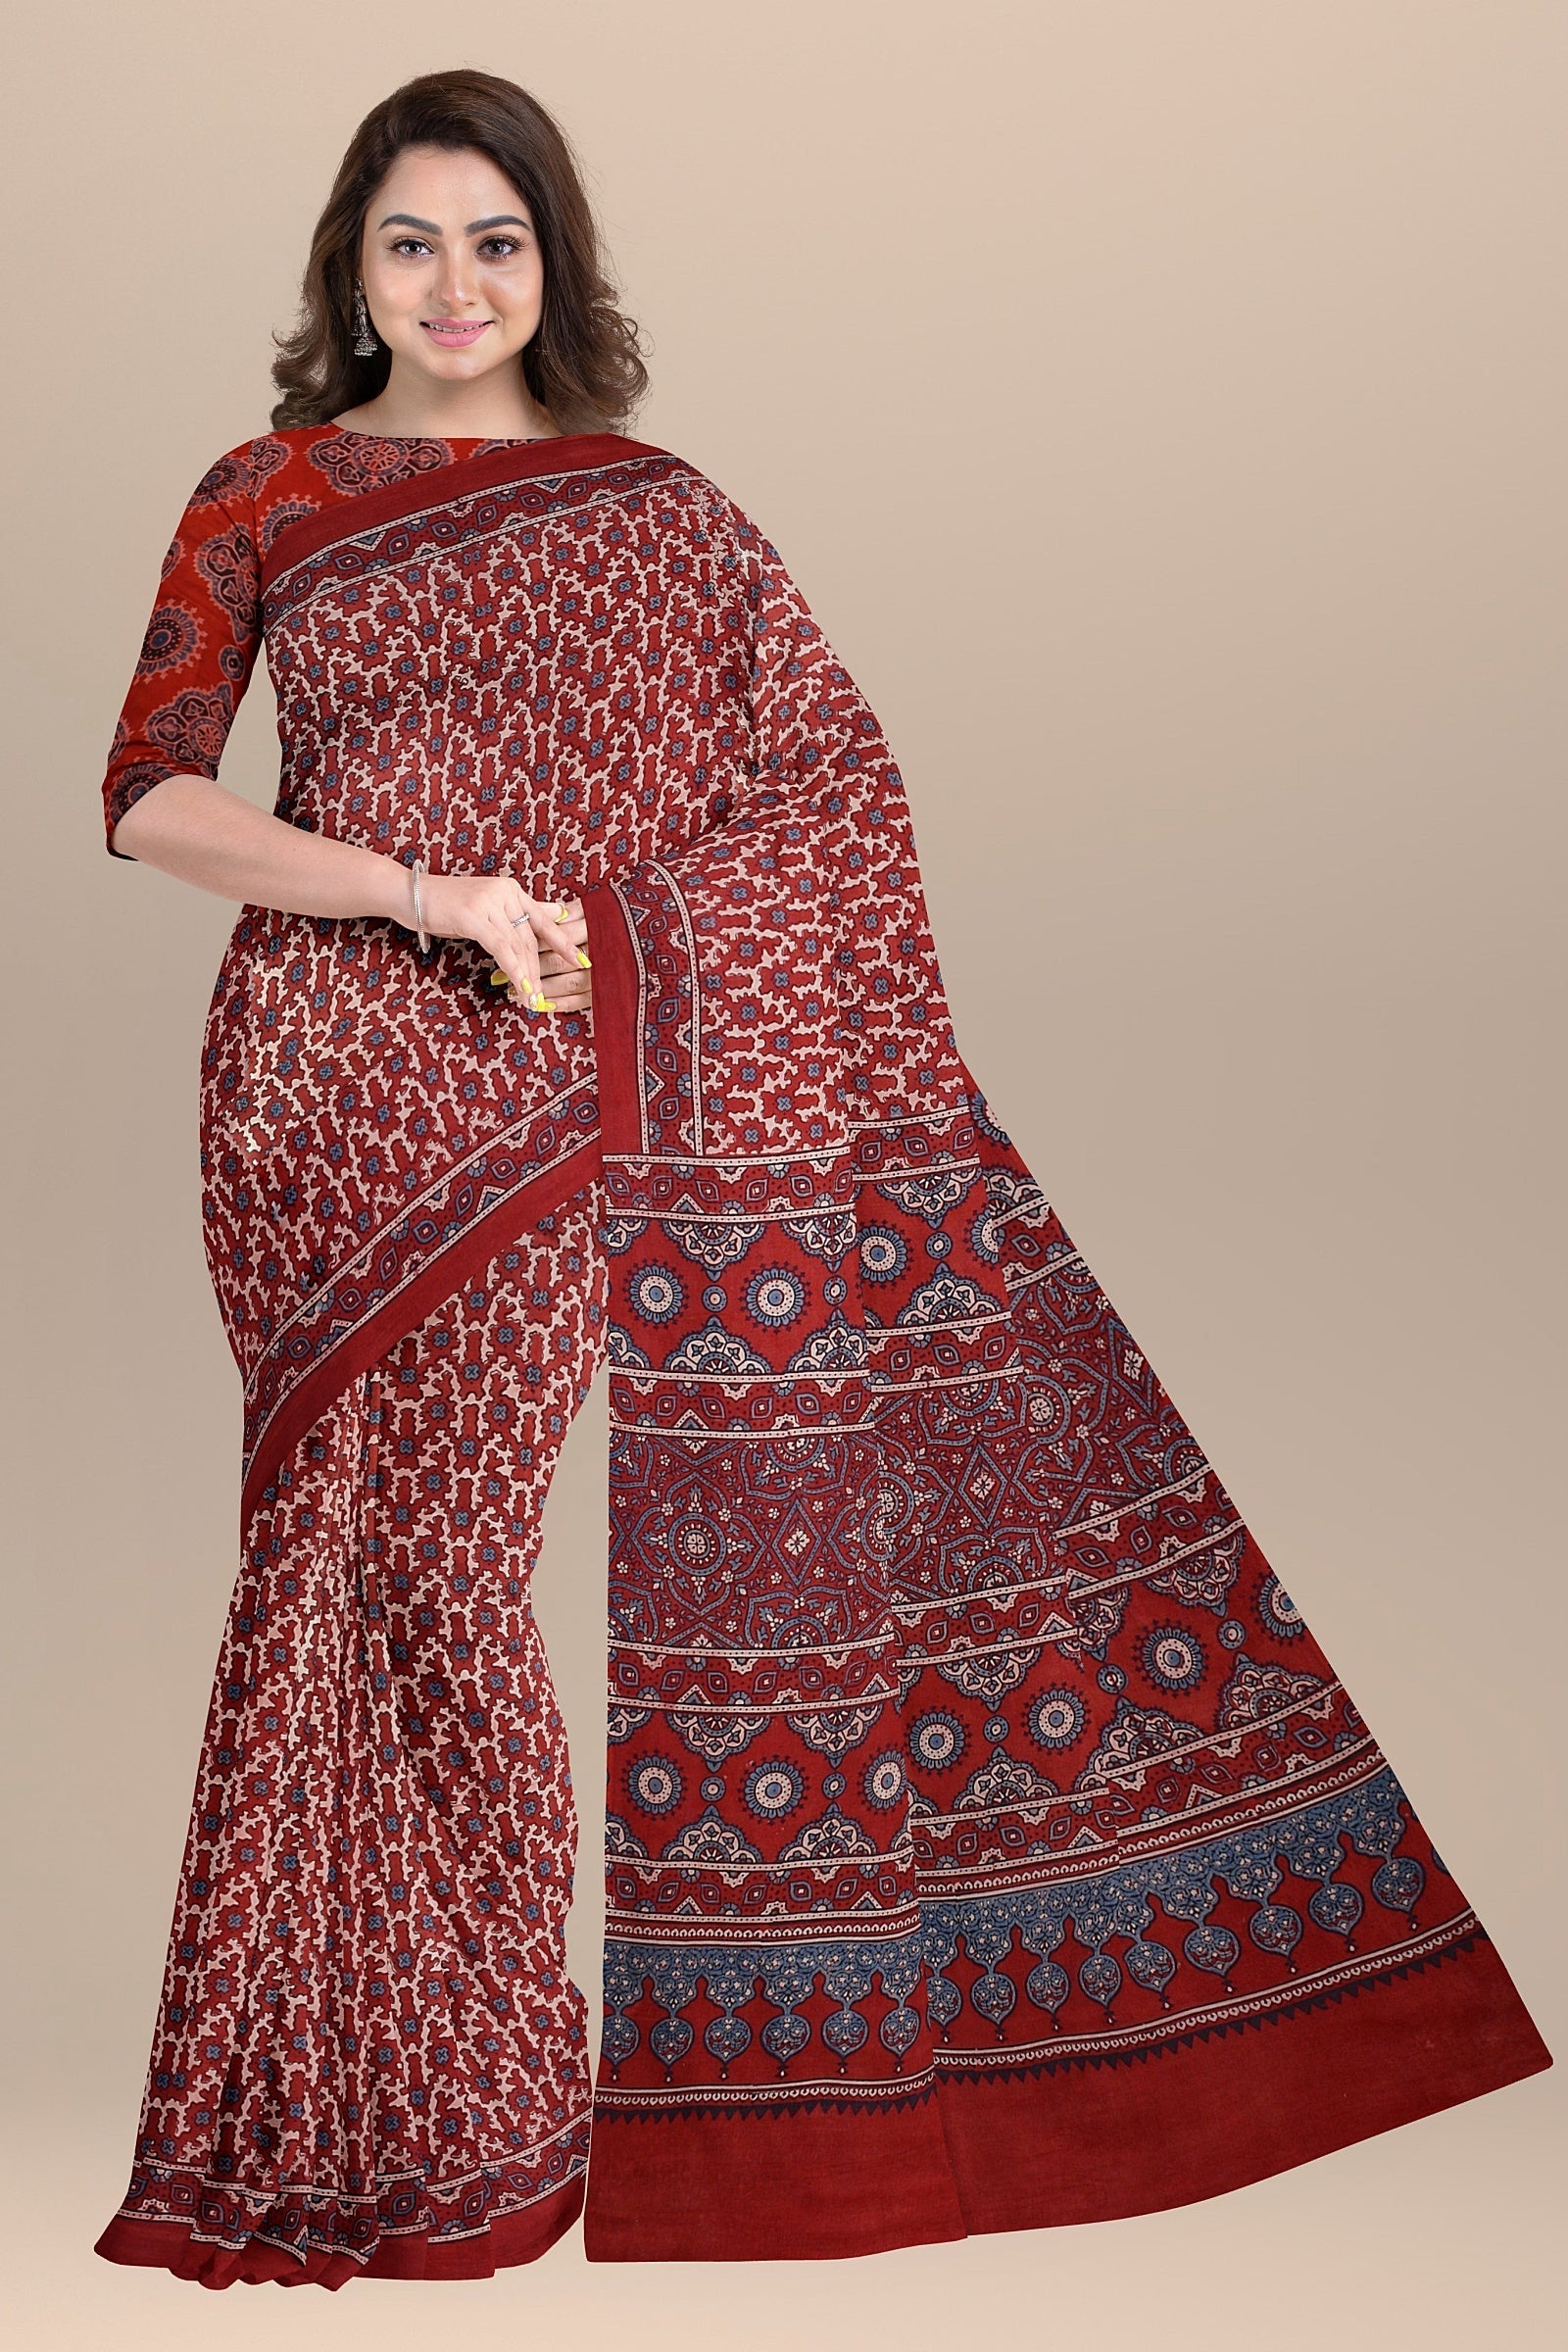 Pastel Red Color Traditional Blue and Red Floral and Geometrical Ajrakh Print Malmal Cotton Saree  SKU-BS10076 - Bhartiya Shilp